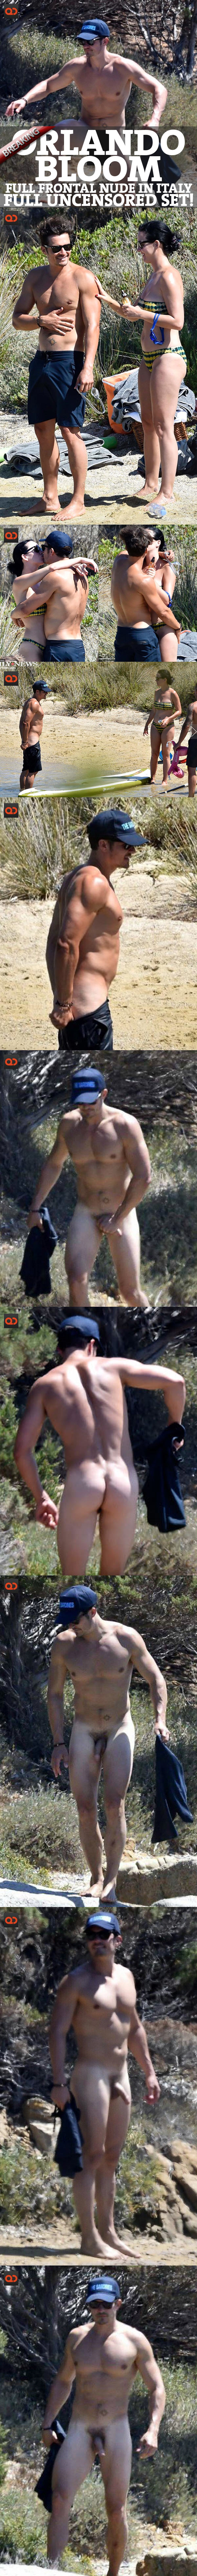 qc-orlando_bloom_full_frontal_naked_reveal_real_photos-collage01